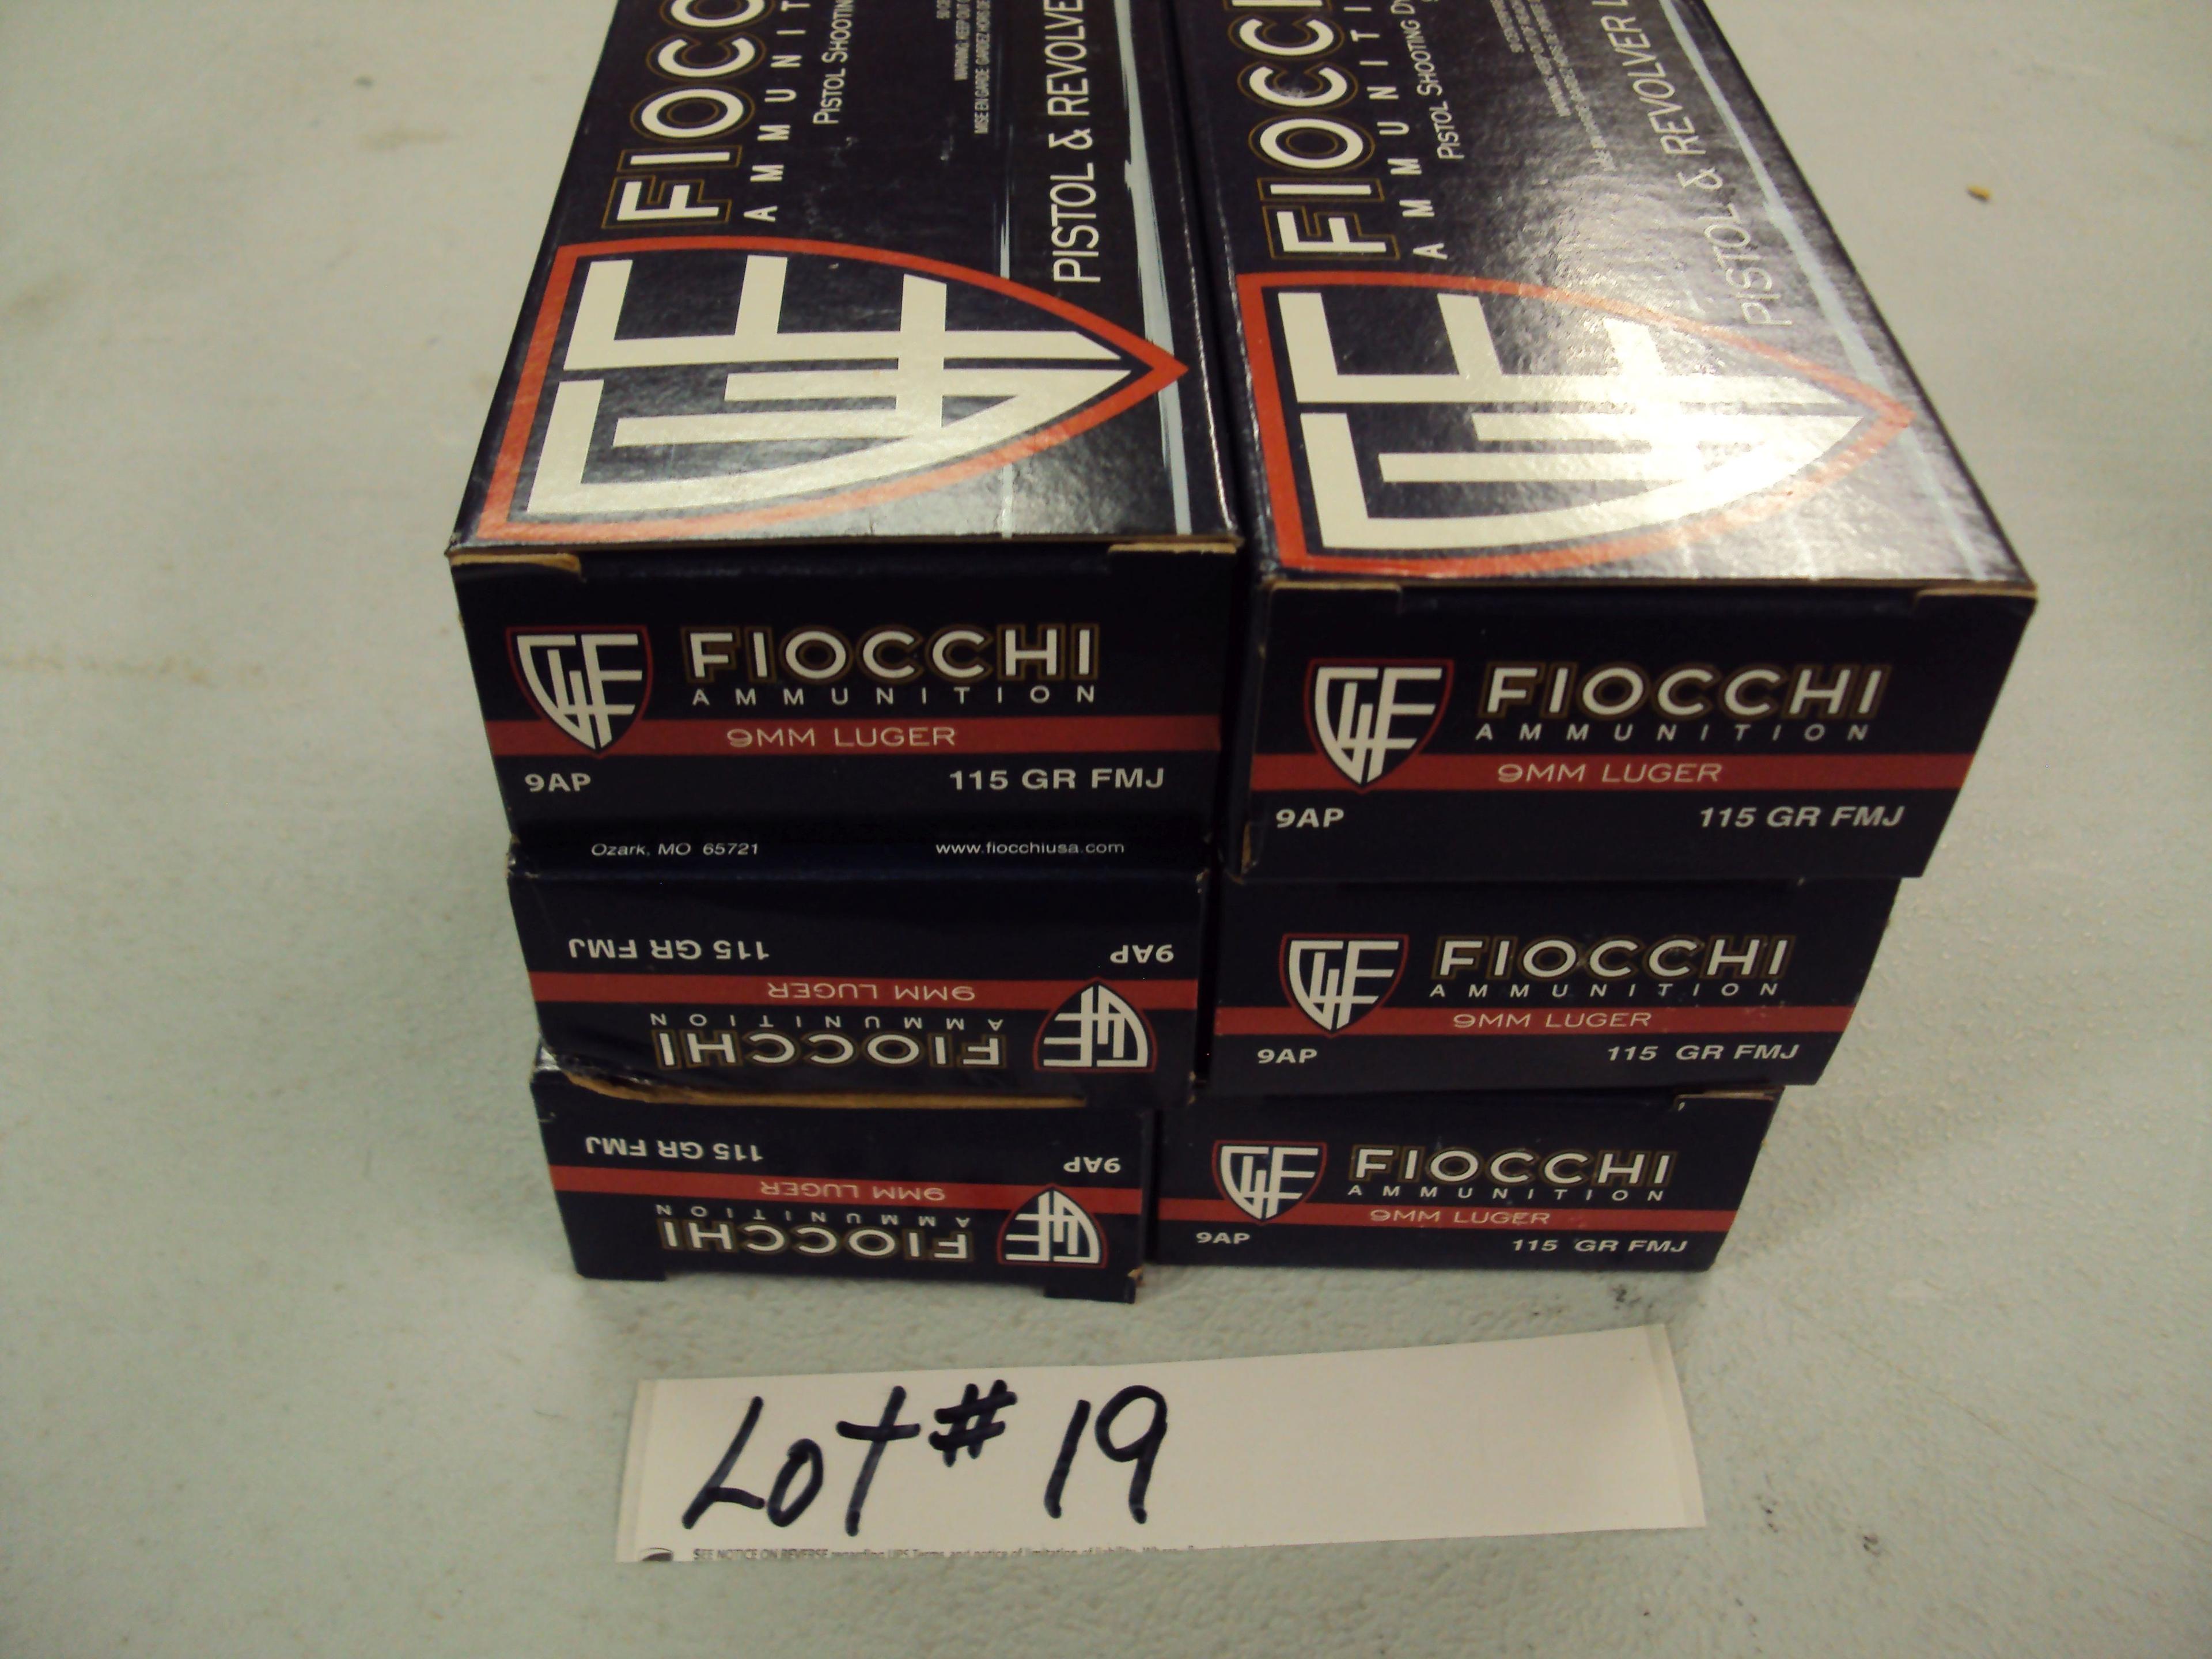 300 ROUNDS OF FIOCCHI 9MM AMMO FMJ - NIB